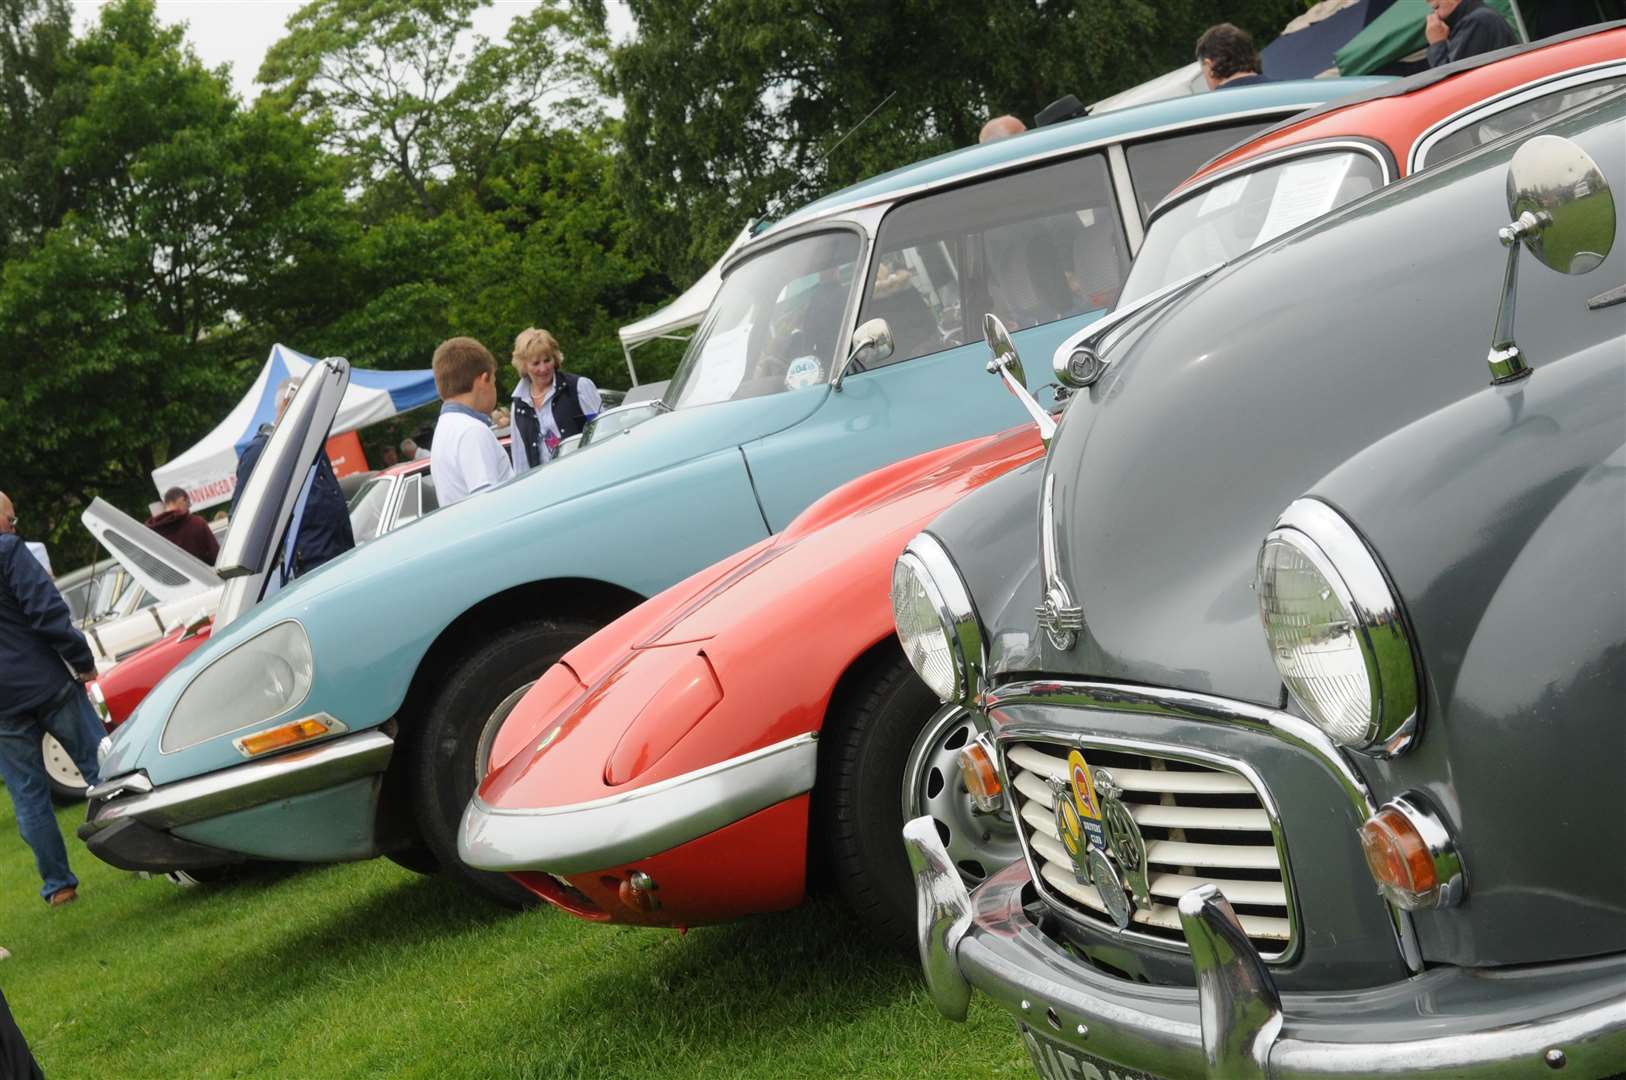 Hundreds of visitors are expected on Bearsted Green for the car show